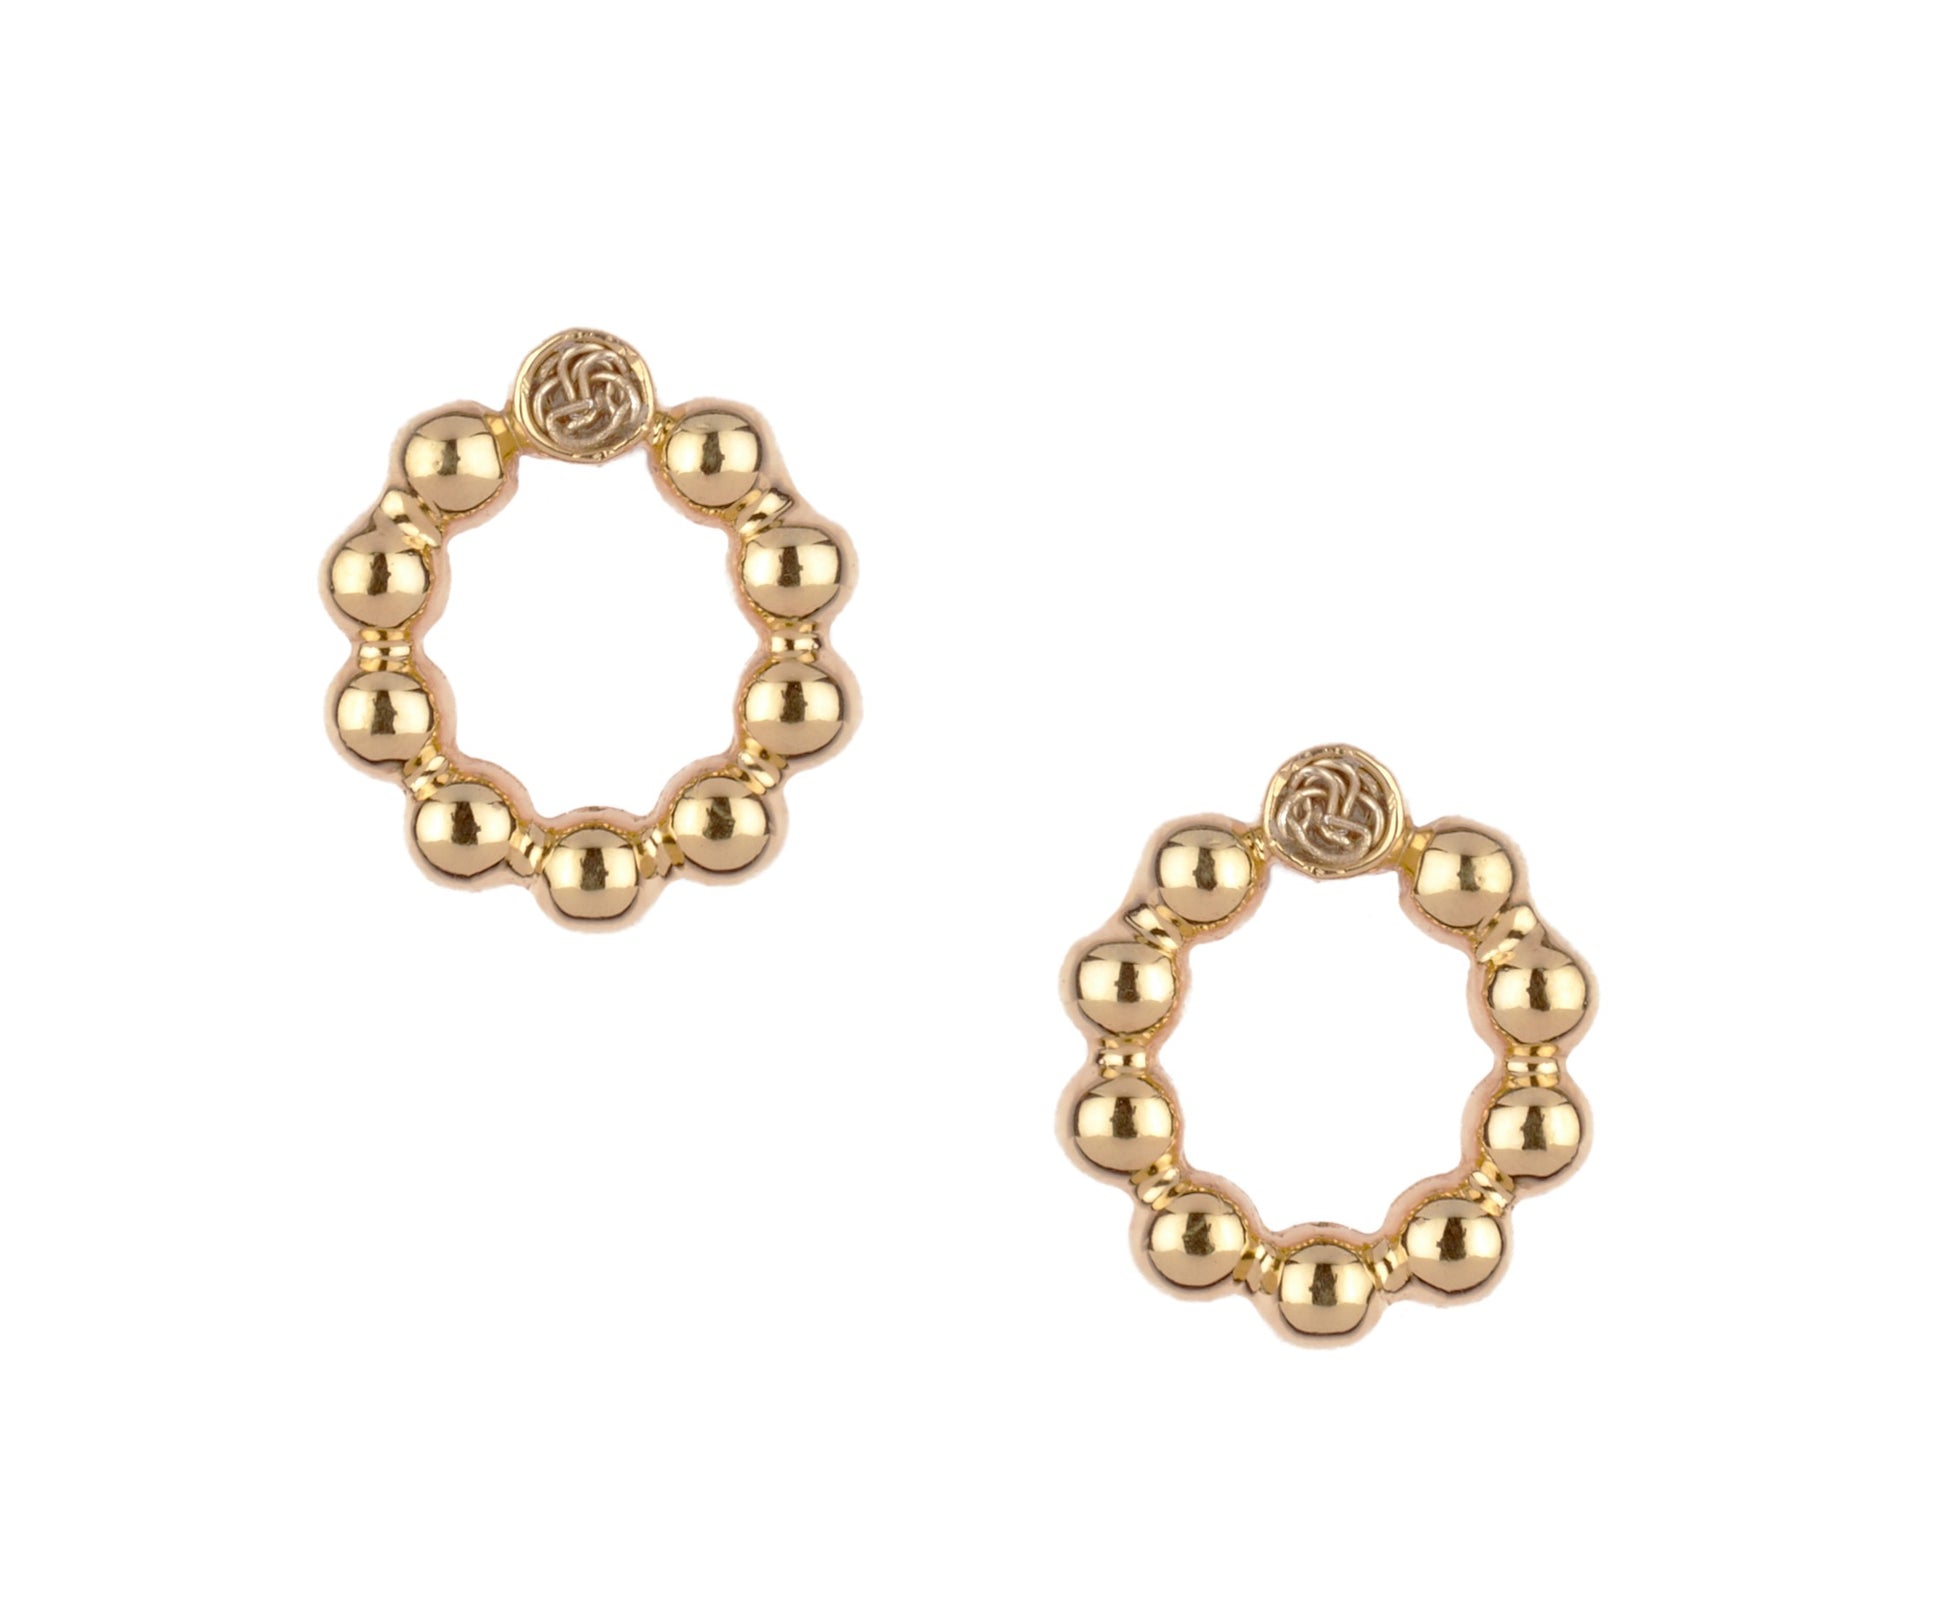 Artfully designed stud gold earrings ideal for those seeking a distinctive and fashionable accessory.